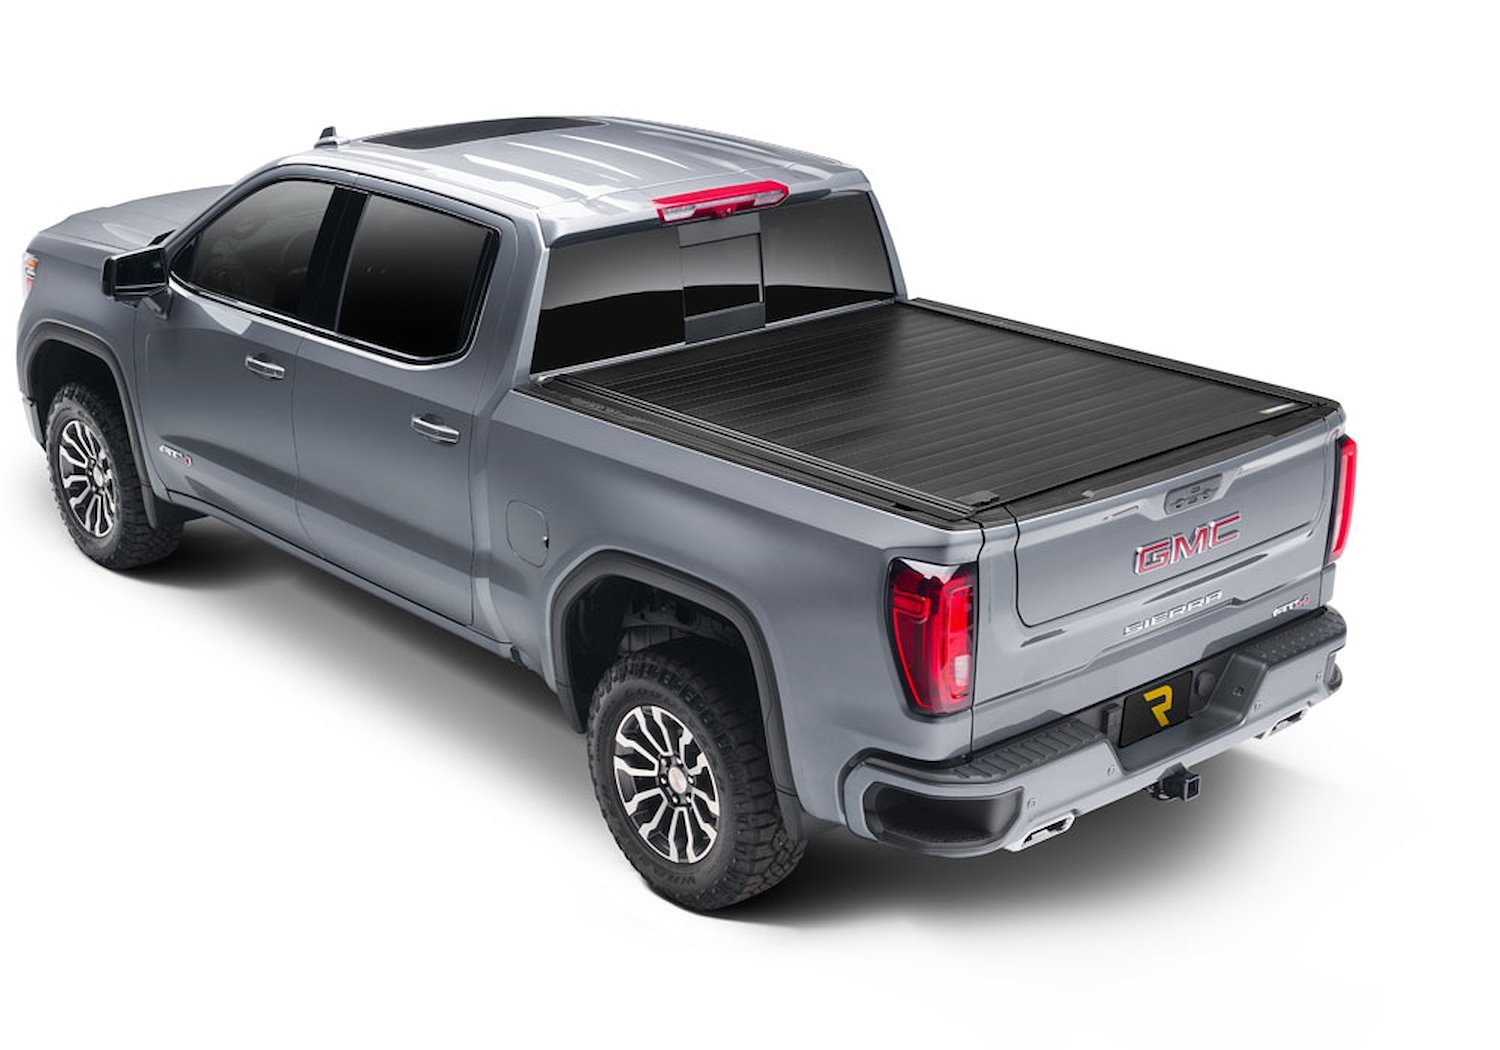 80481 RetraxPRO MX Retractable Tonneau Cover Fits Select Chevy Silverado/GMC Sierra 5' 9" Bed without Stake Pockets